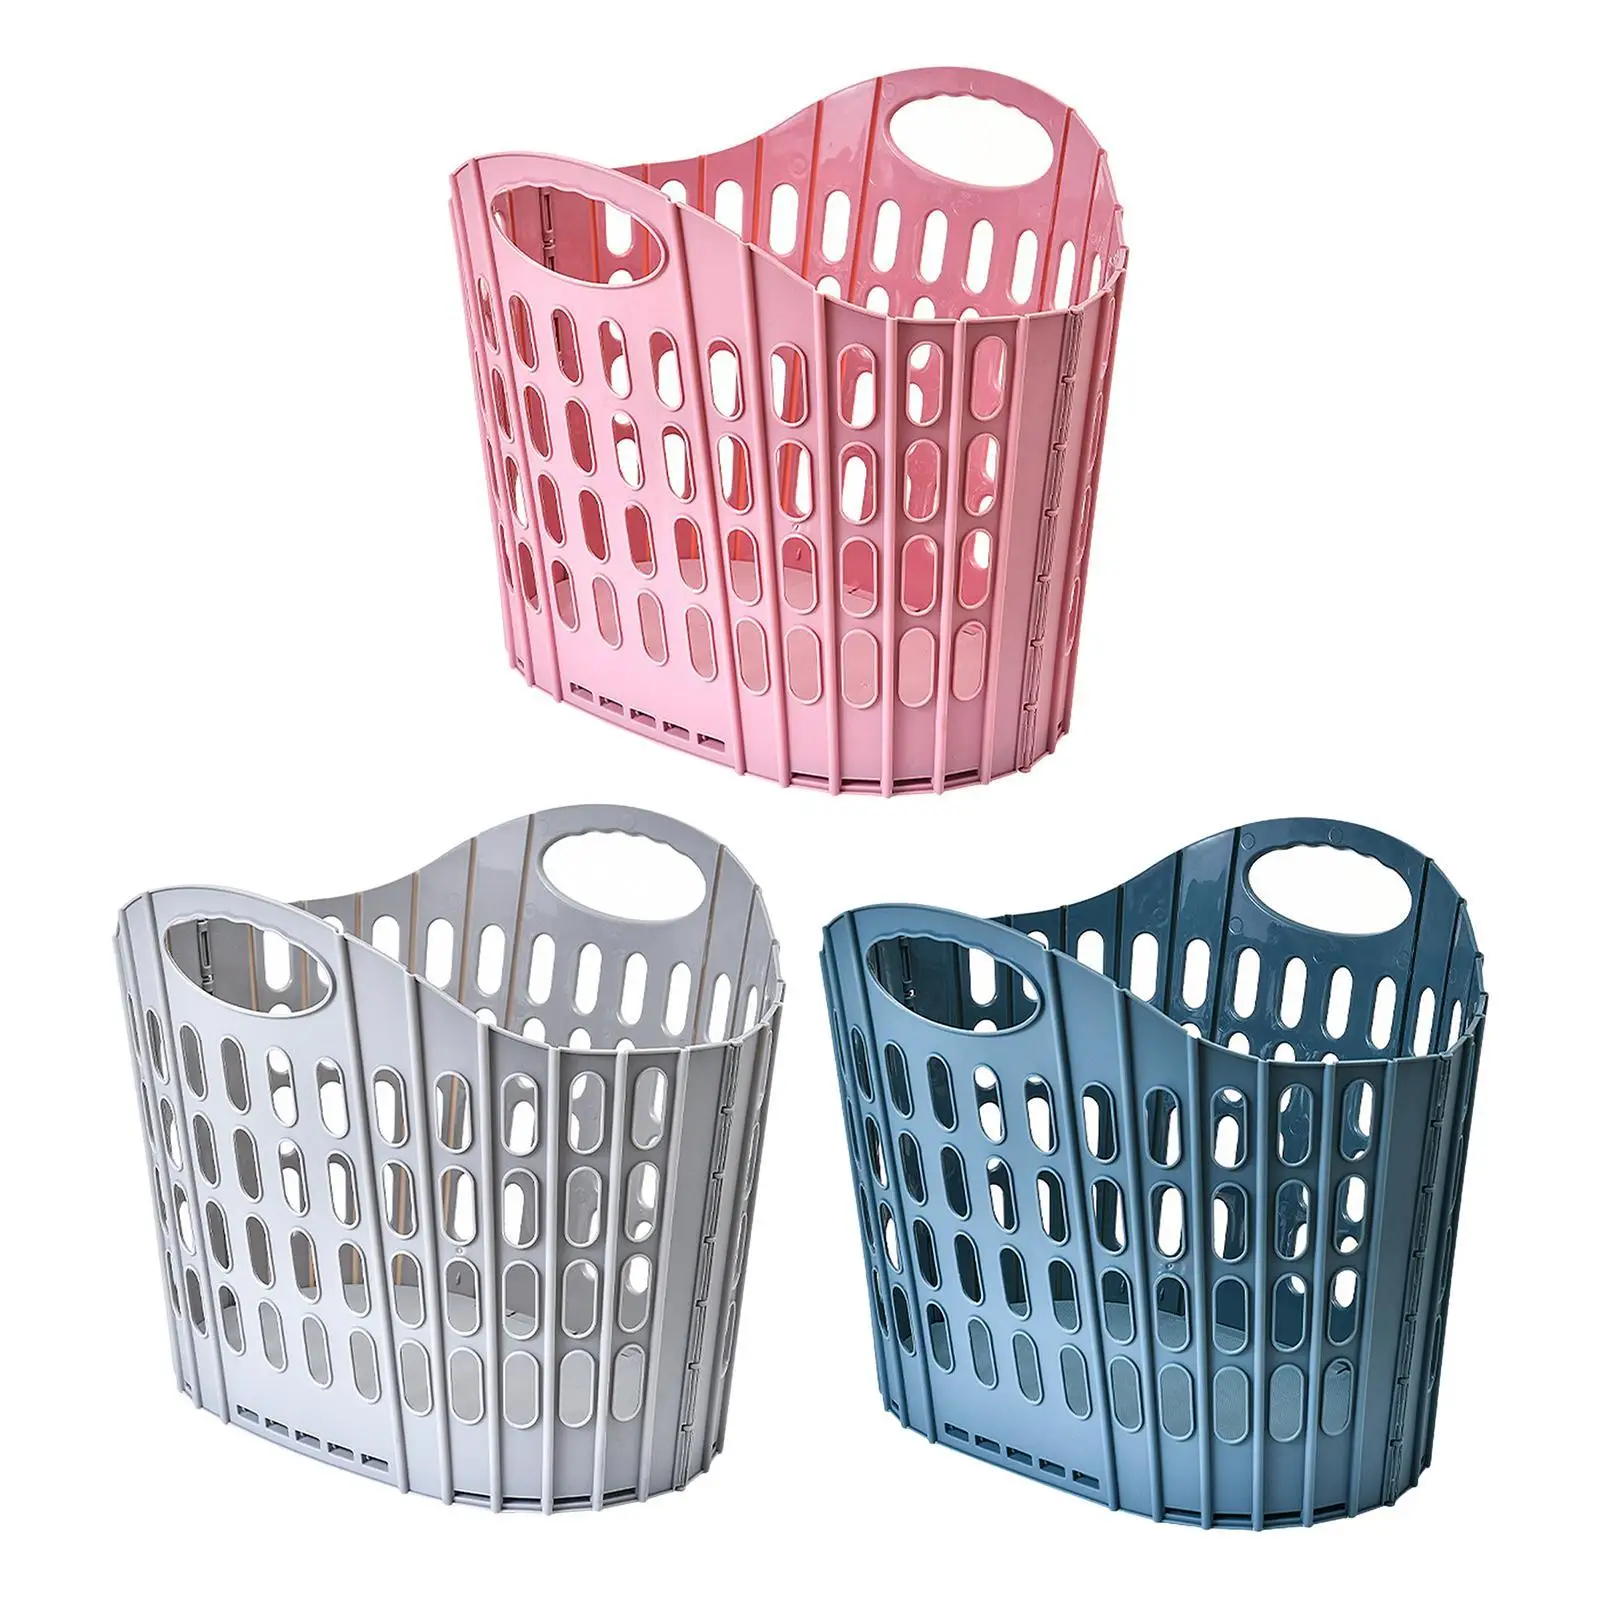 Collapsible Laundry Basket Laundry Hamper with Handles Durable for Dirty Clothes Towels Blankets Bedroom Bathroom Punch-Free